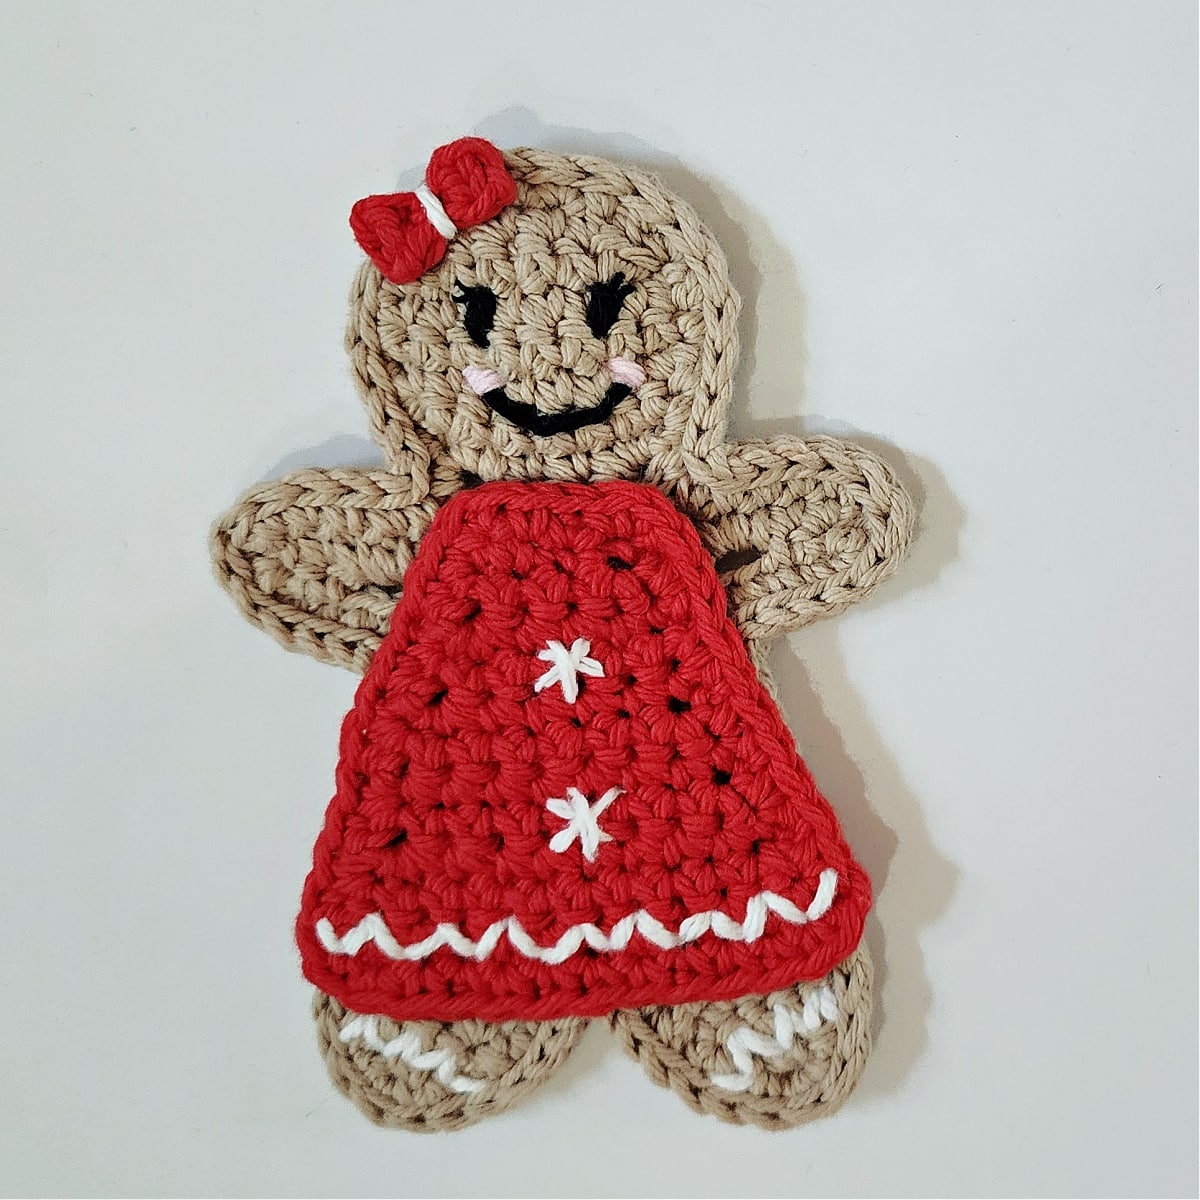 Crochet gingerbread girl wearing red dress with red hair bow.